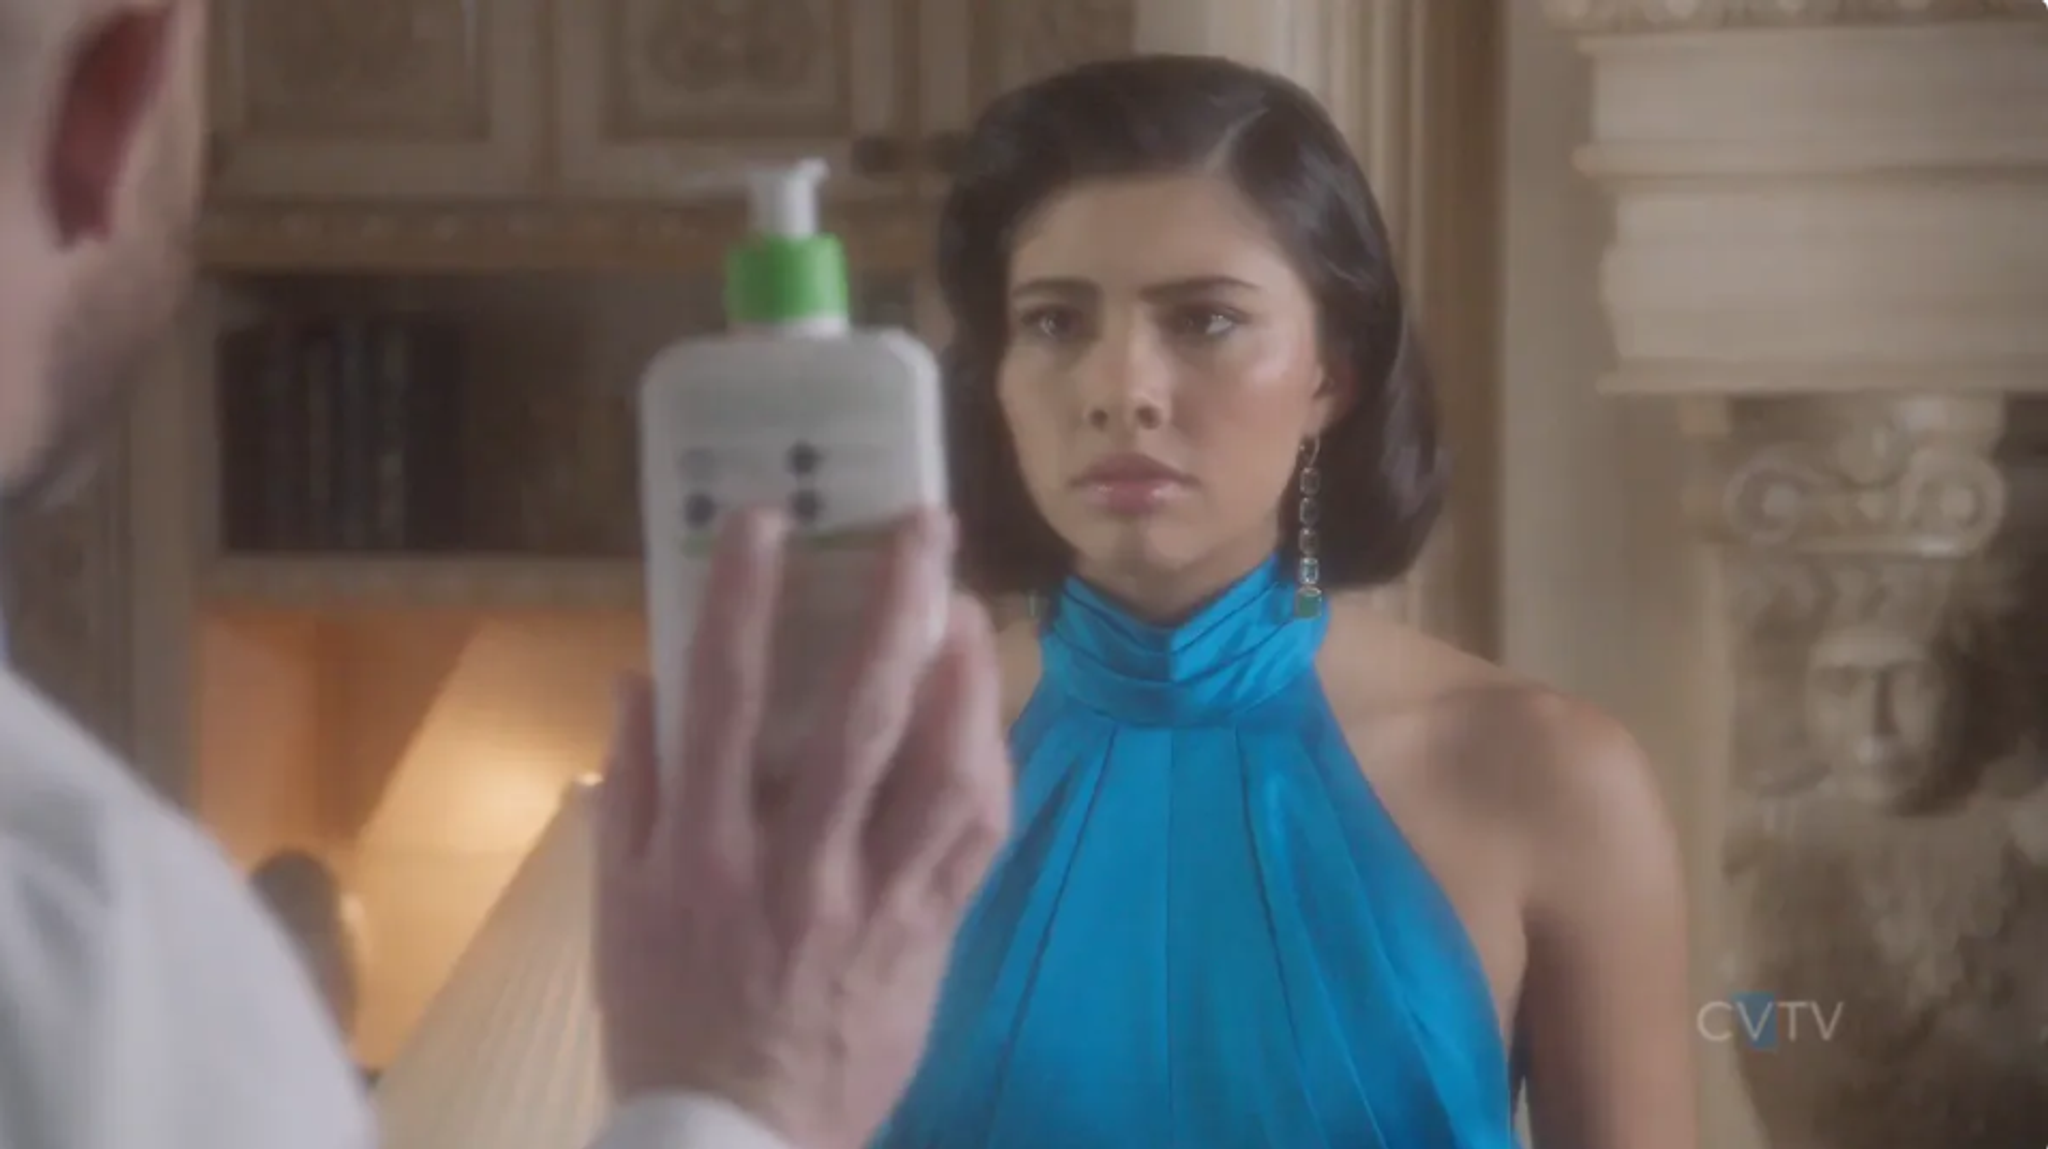 CeraVe uses soap opera clichés to connect with Gen Z